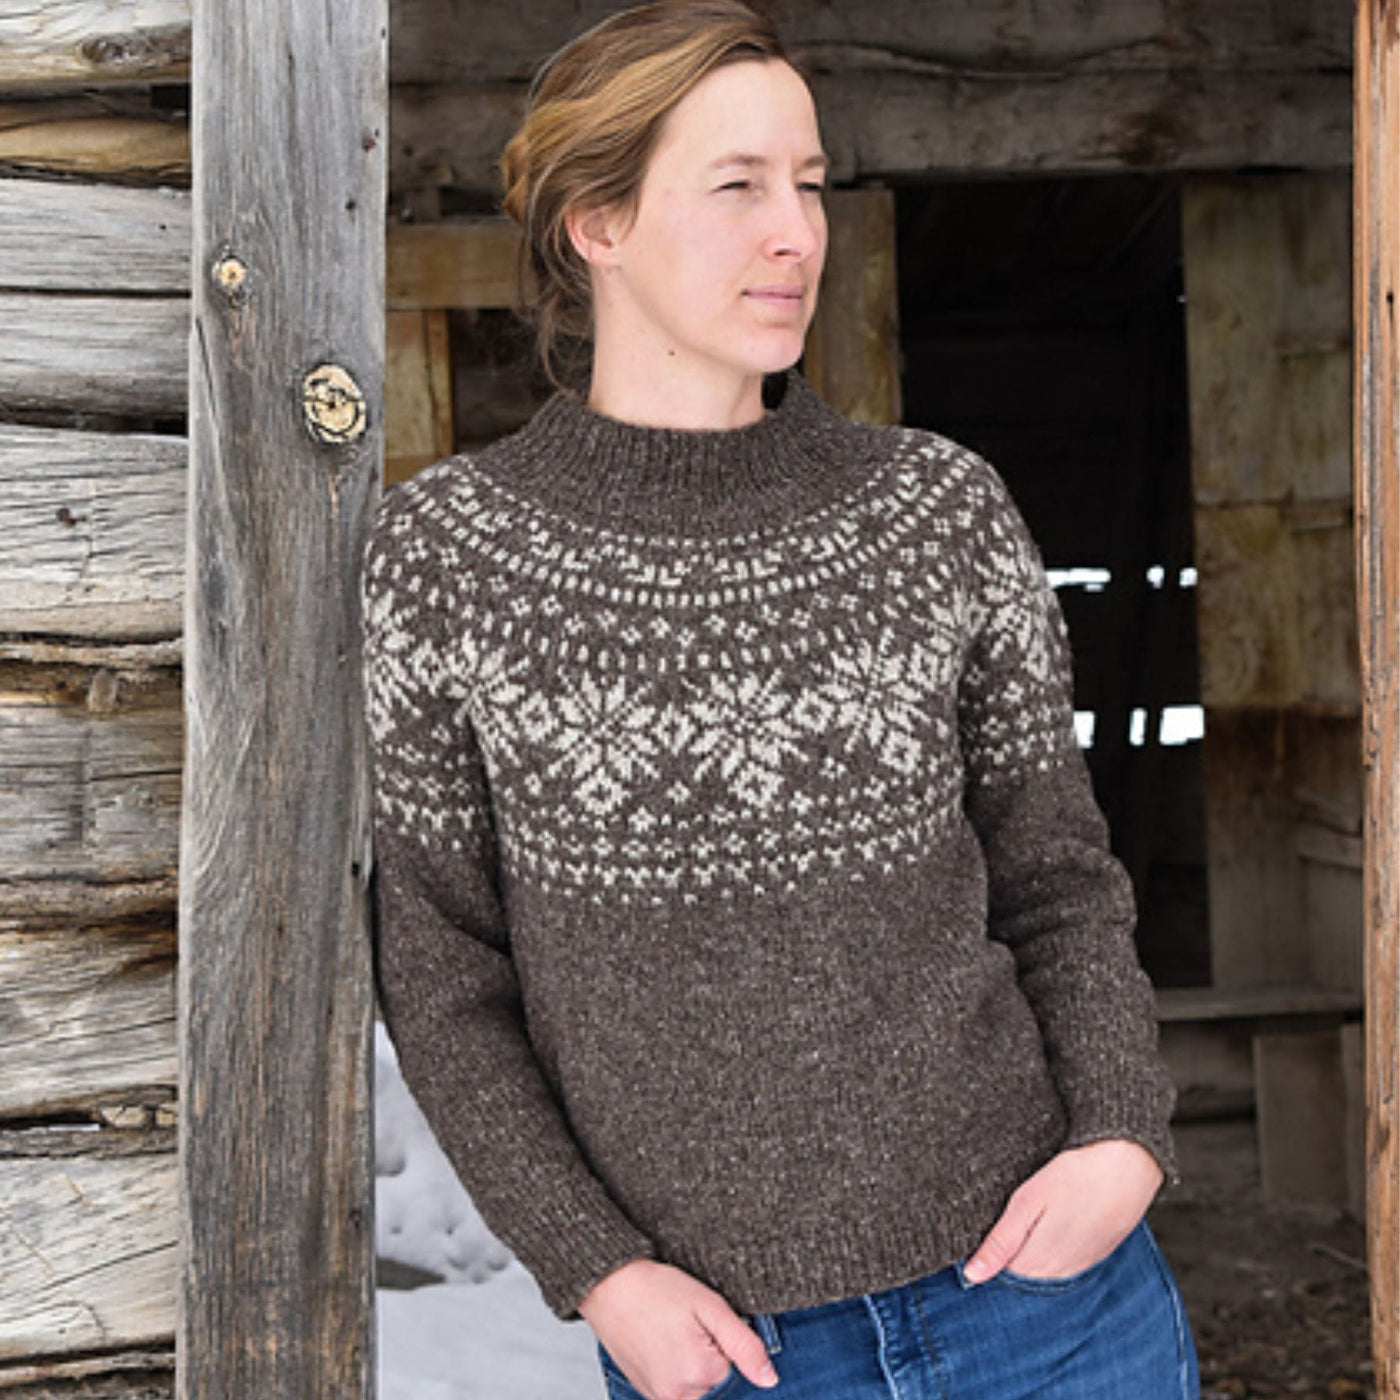 Winter Woods Yarn Set in Manchelopis by Jessica McDonald